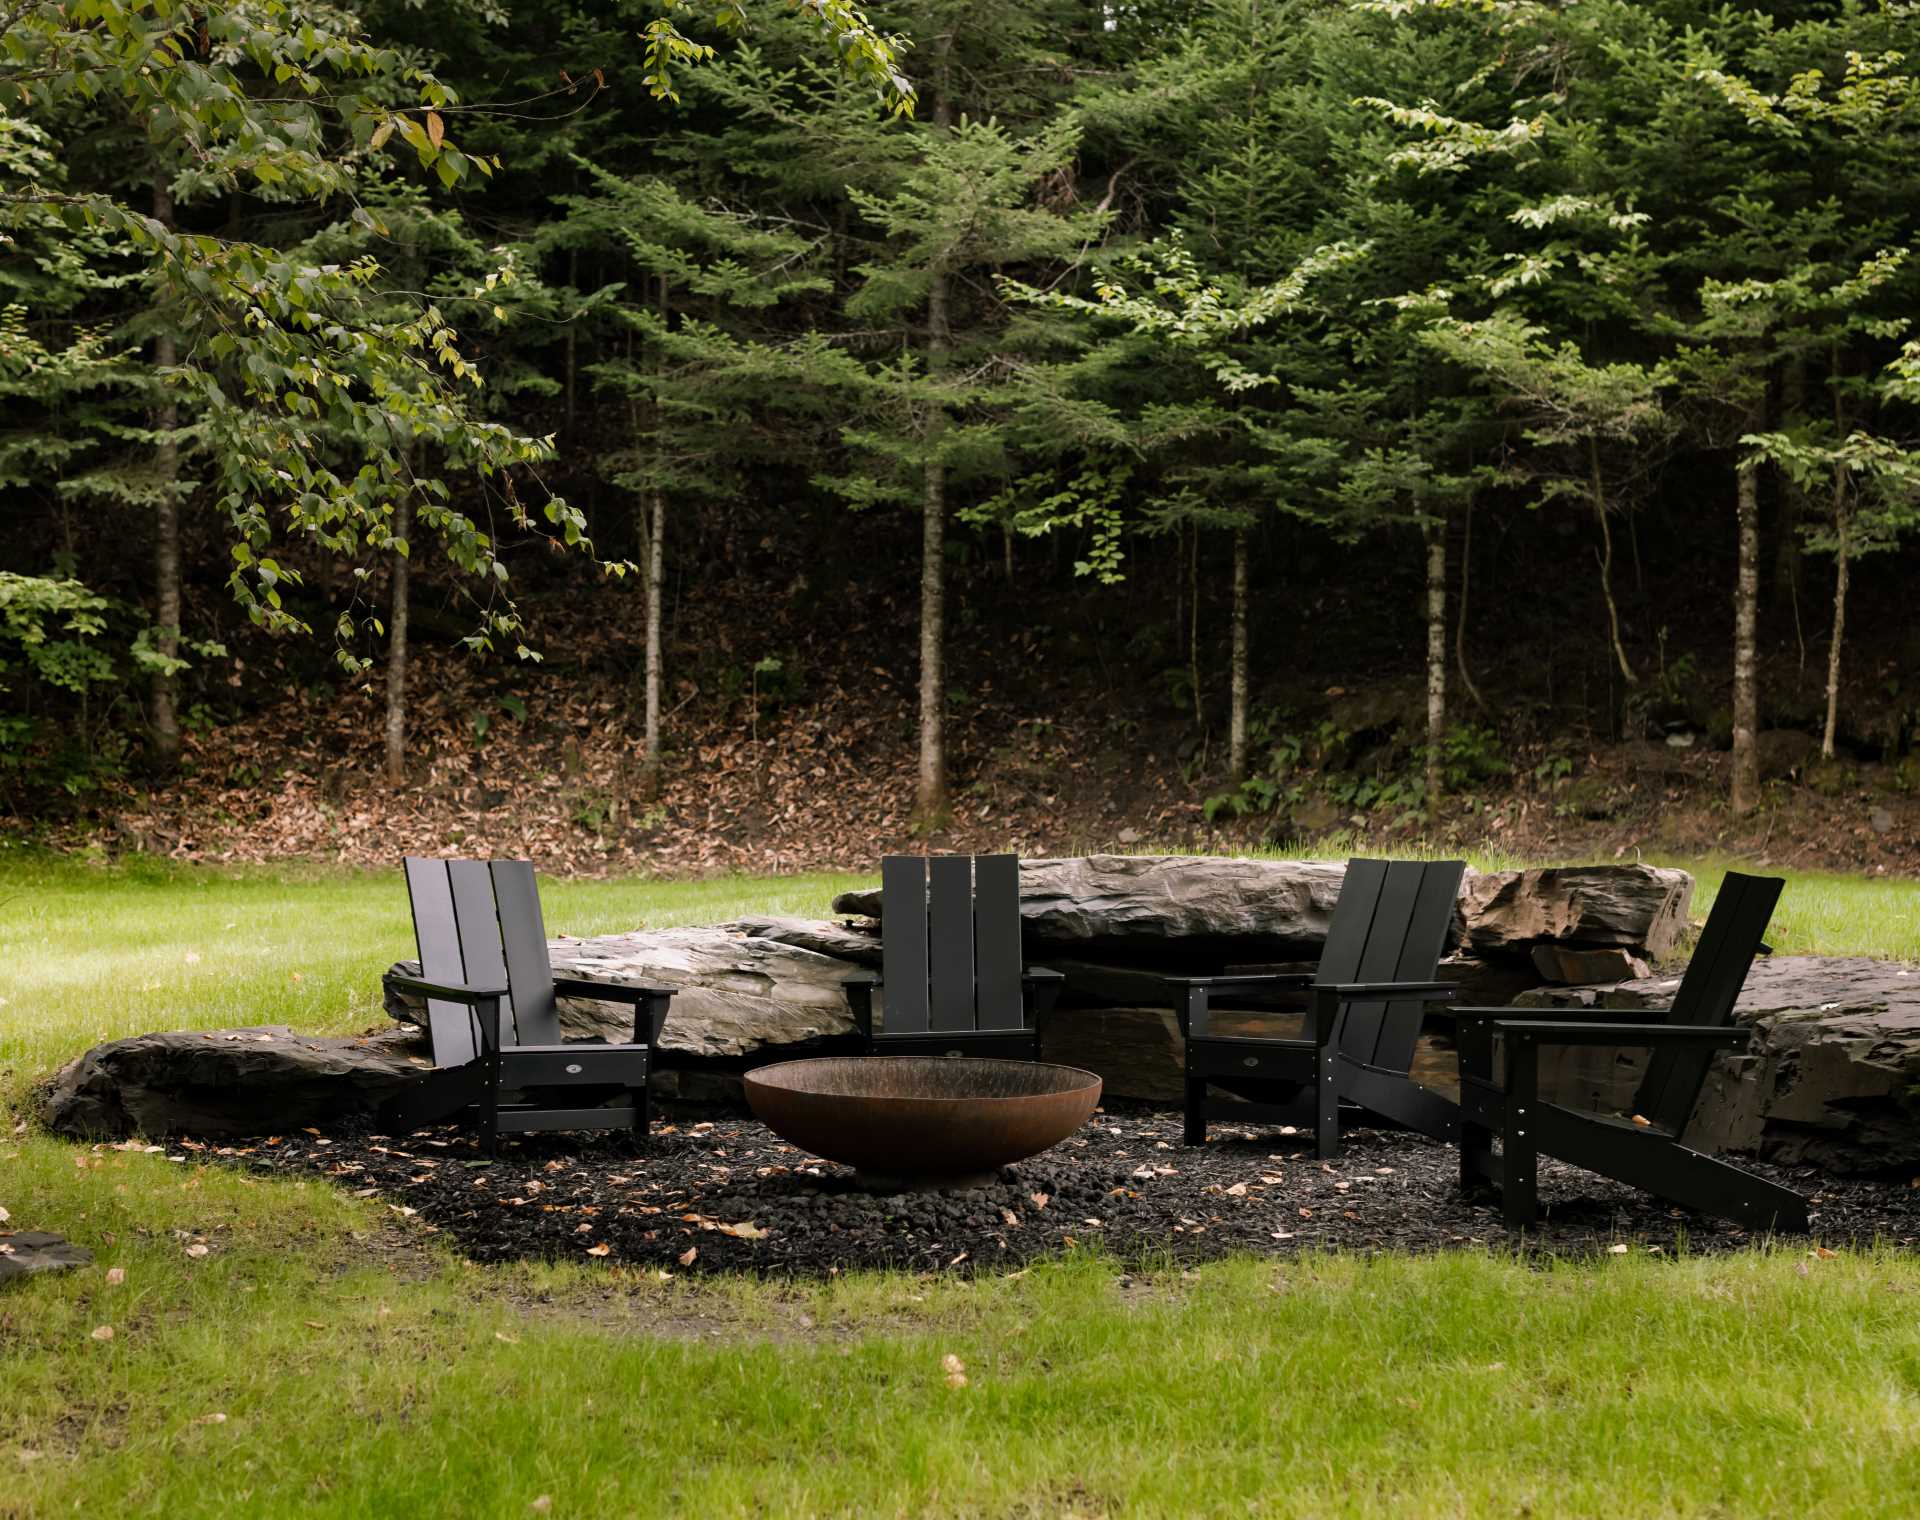 A landscaped fire pit with a partial rock wall.